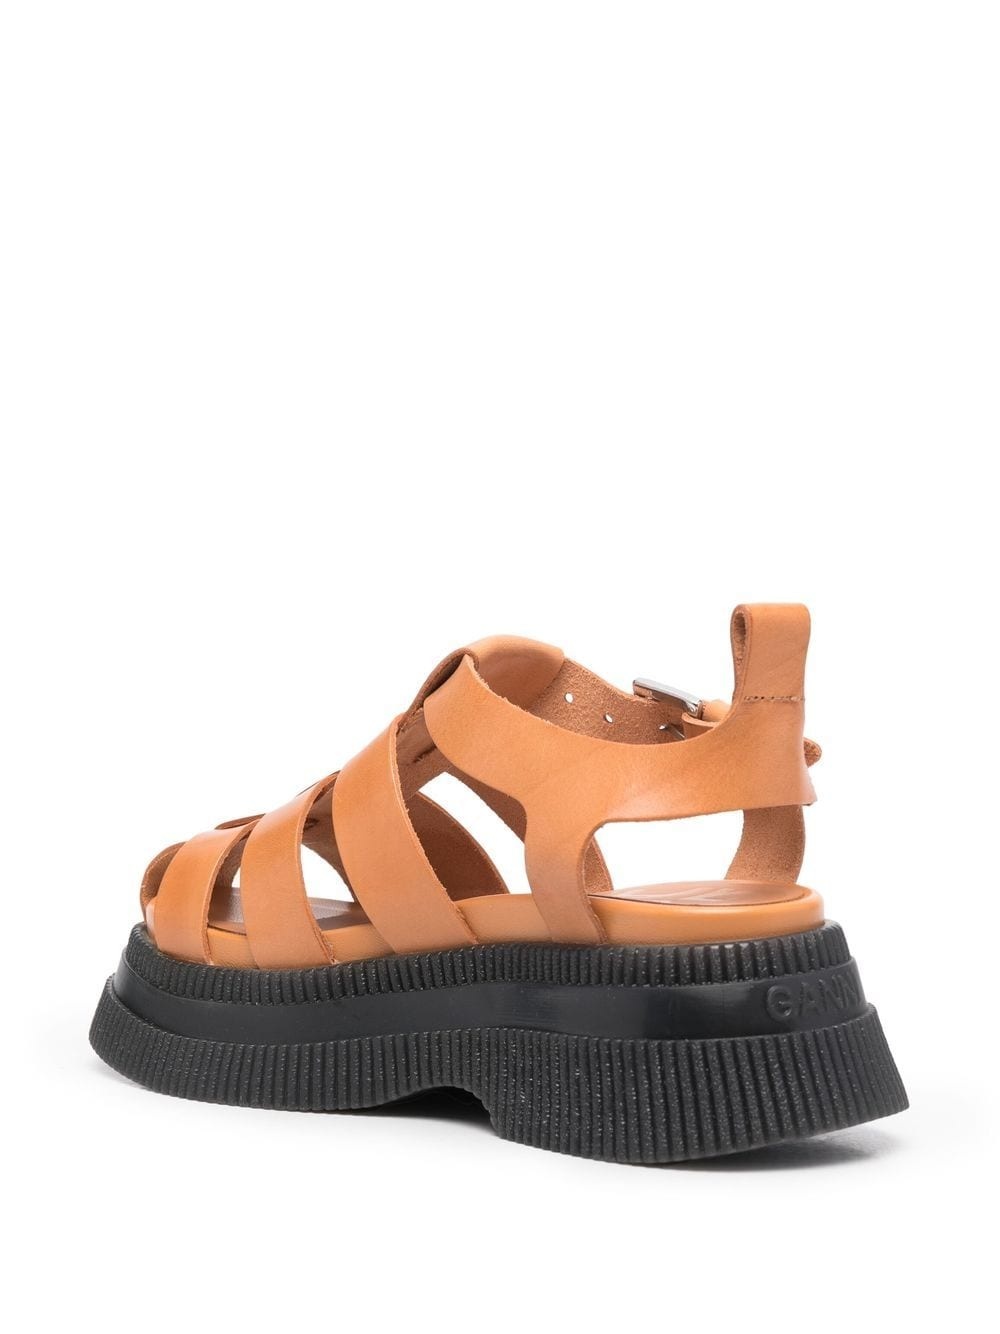 Creepers caged sandals - 3